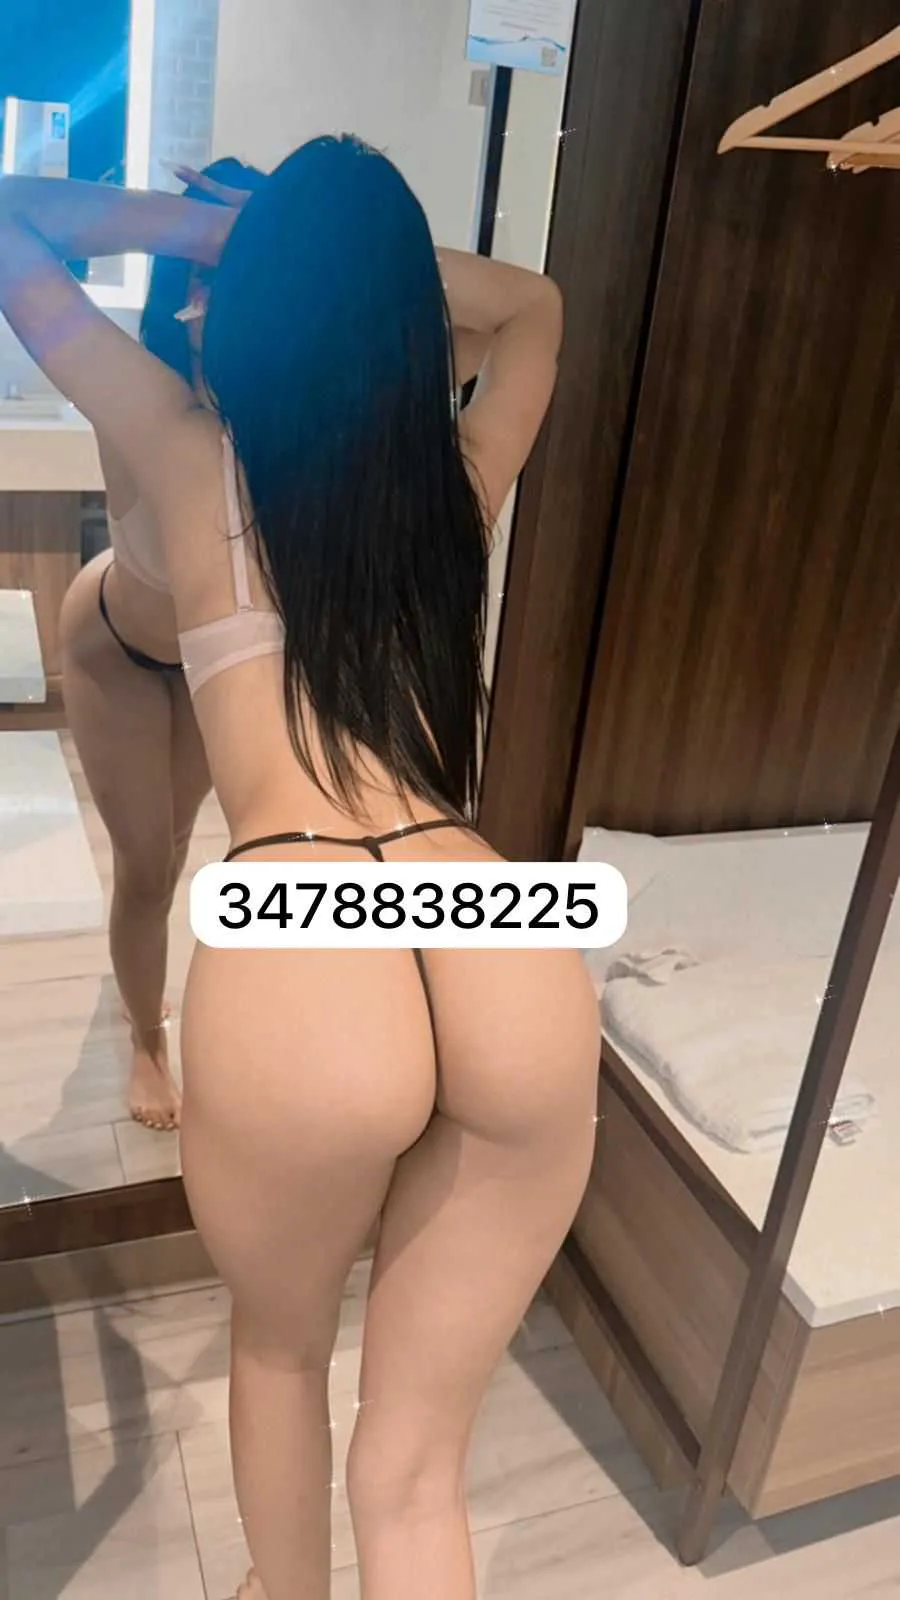 Reviews about escort with phone number 3478838225